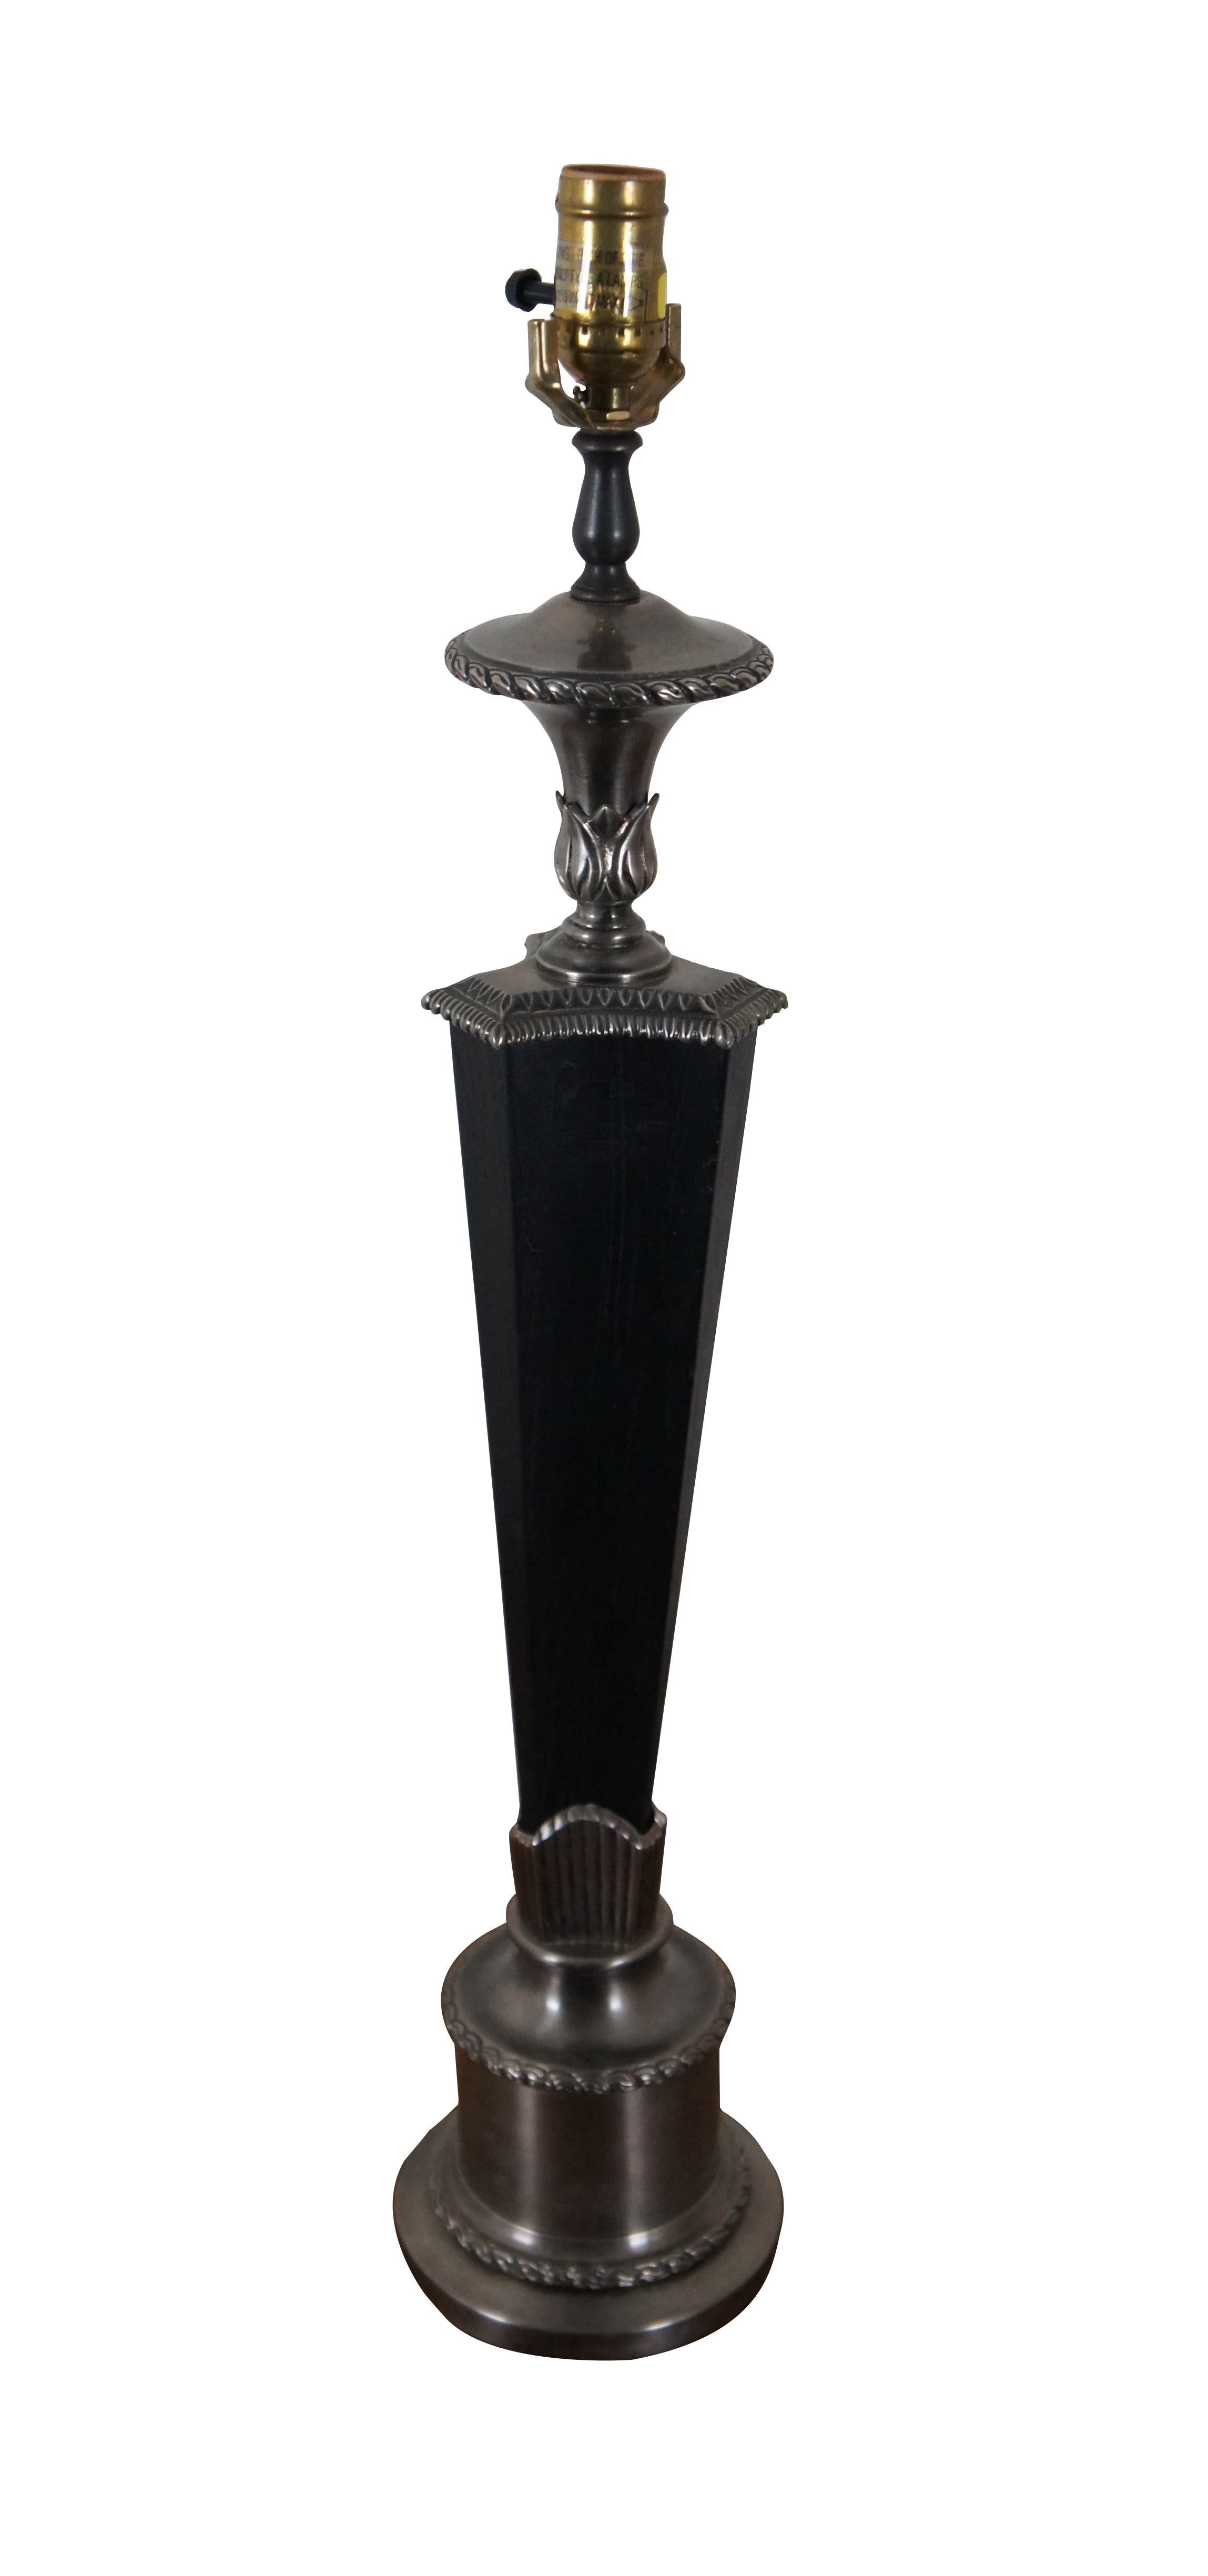 Chapman torchiere / torch shaped table lamp crafted of ebonized wood and brushed silver tone metal, with a round base and triangular body with concave sides. No harp, no shade.  Circa 2000.

DIMENSIONS
6” x 30” (Diameter x Height)